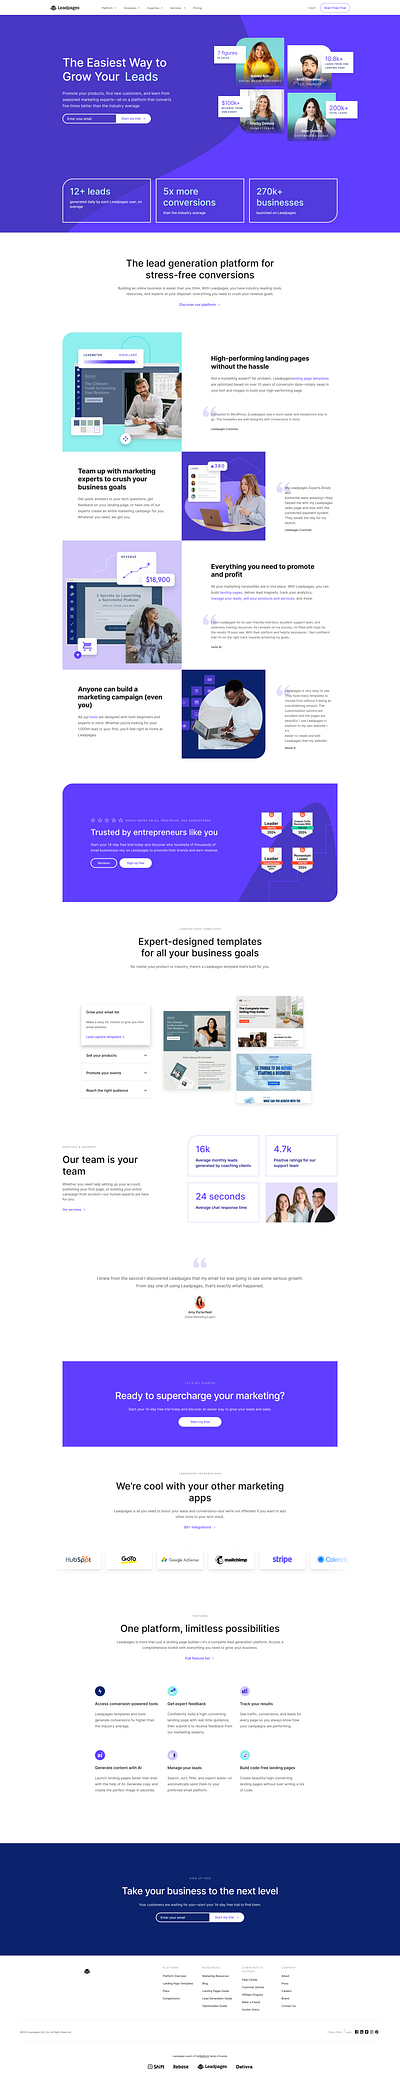 Automate your lead generation and breathe easy with Leadpages landing page lead generation ui webpage